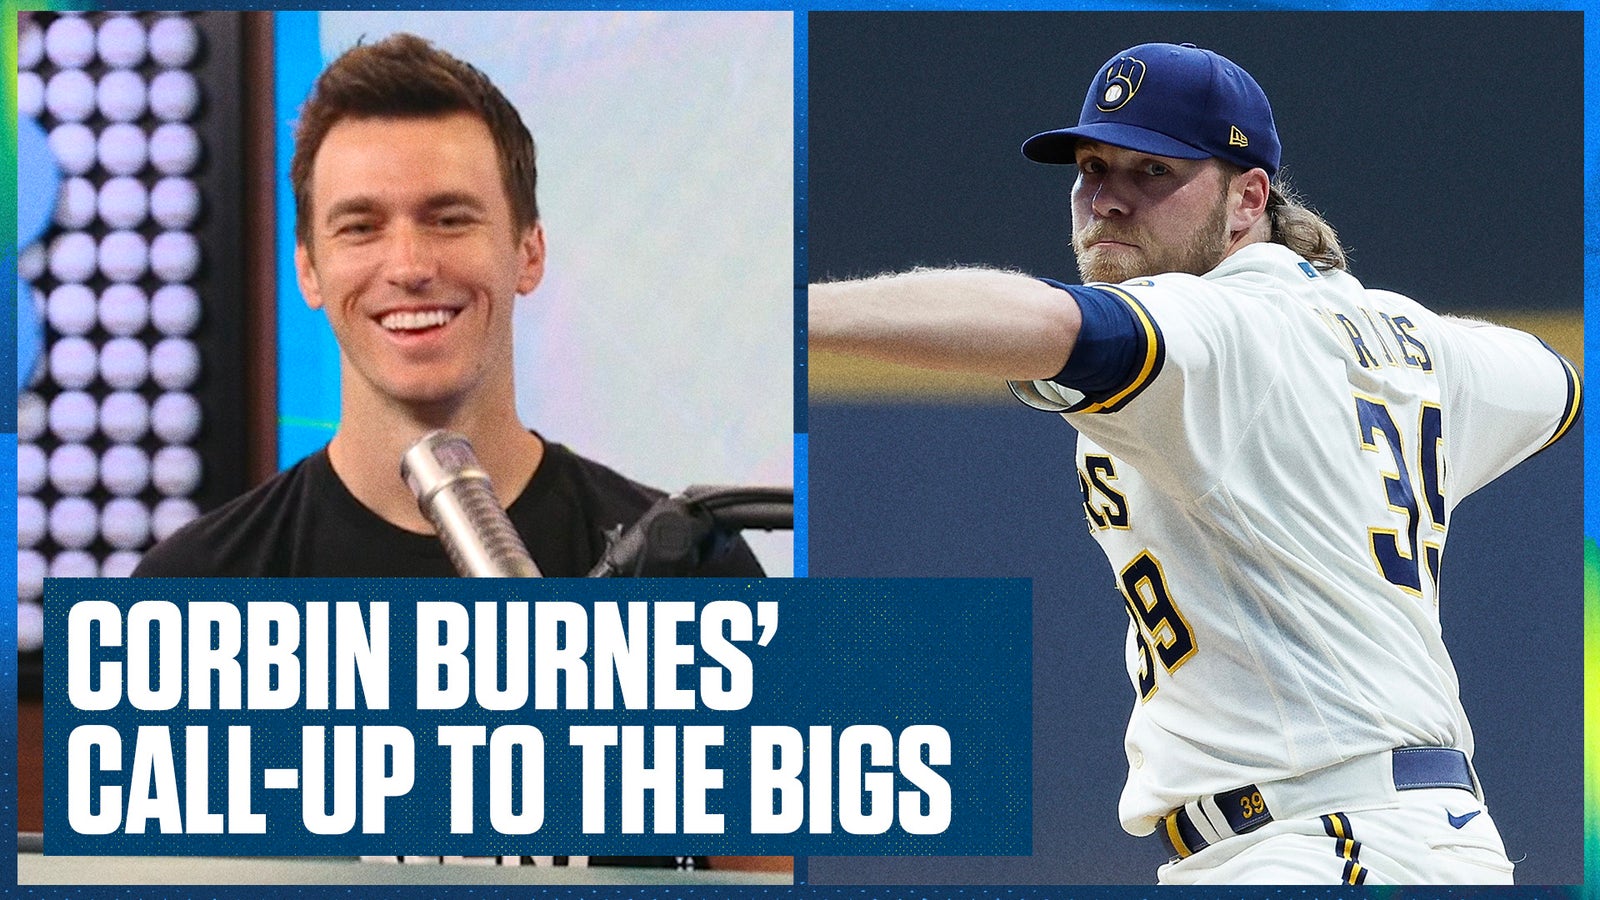 Burnes on getting called up to MLB & debuting in front of 6,000 fans